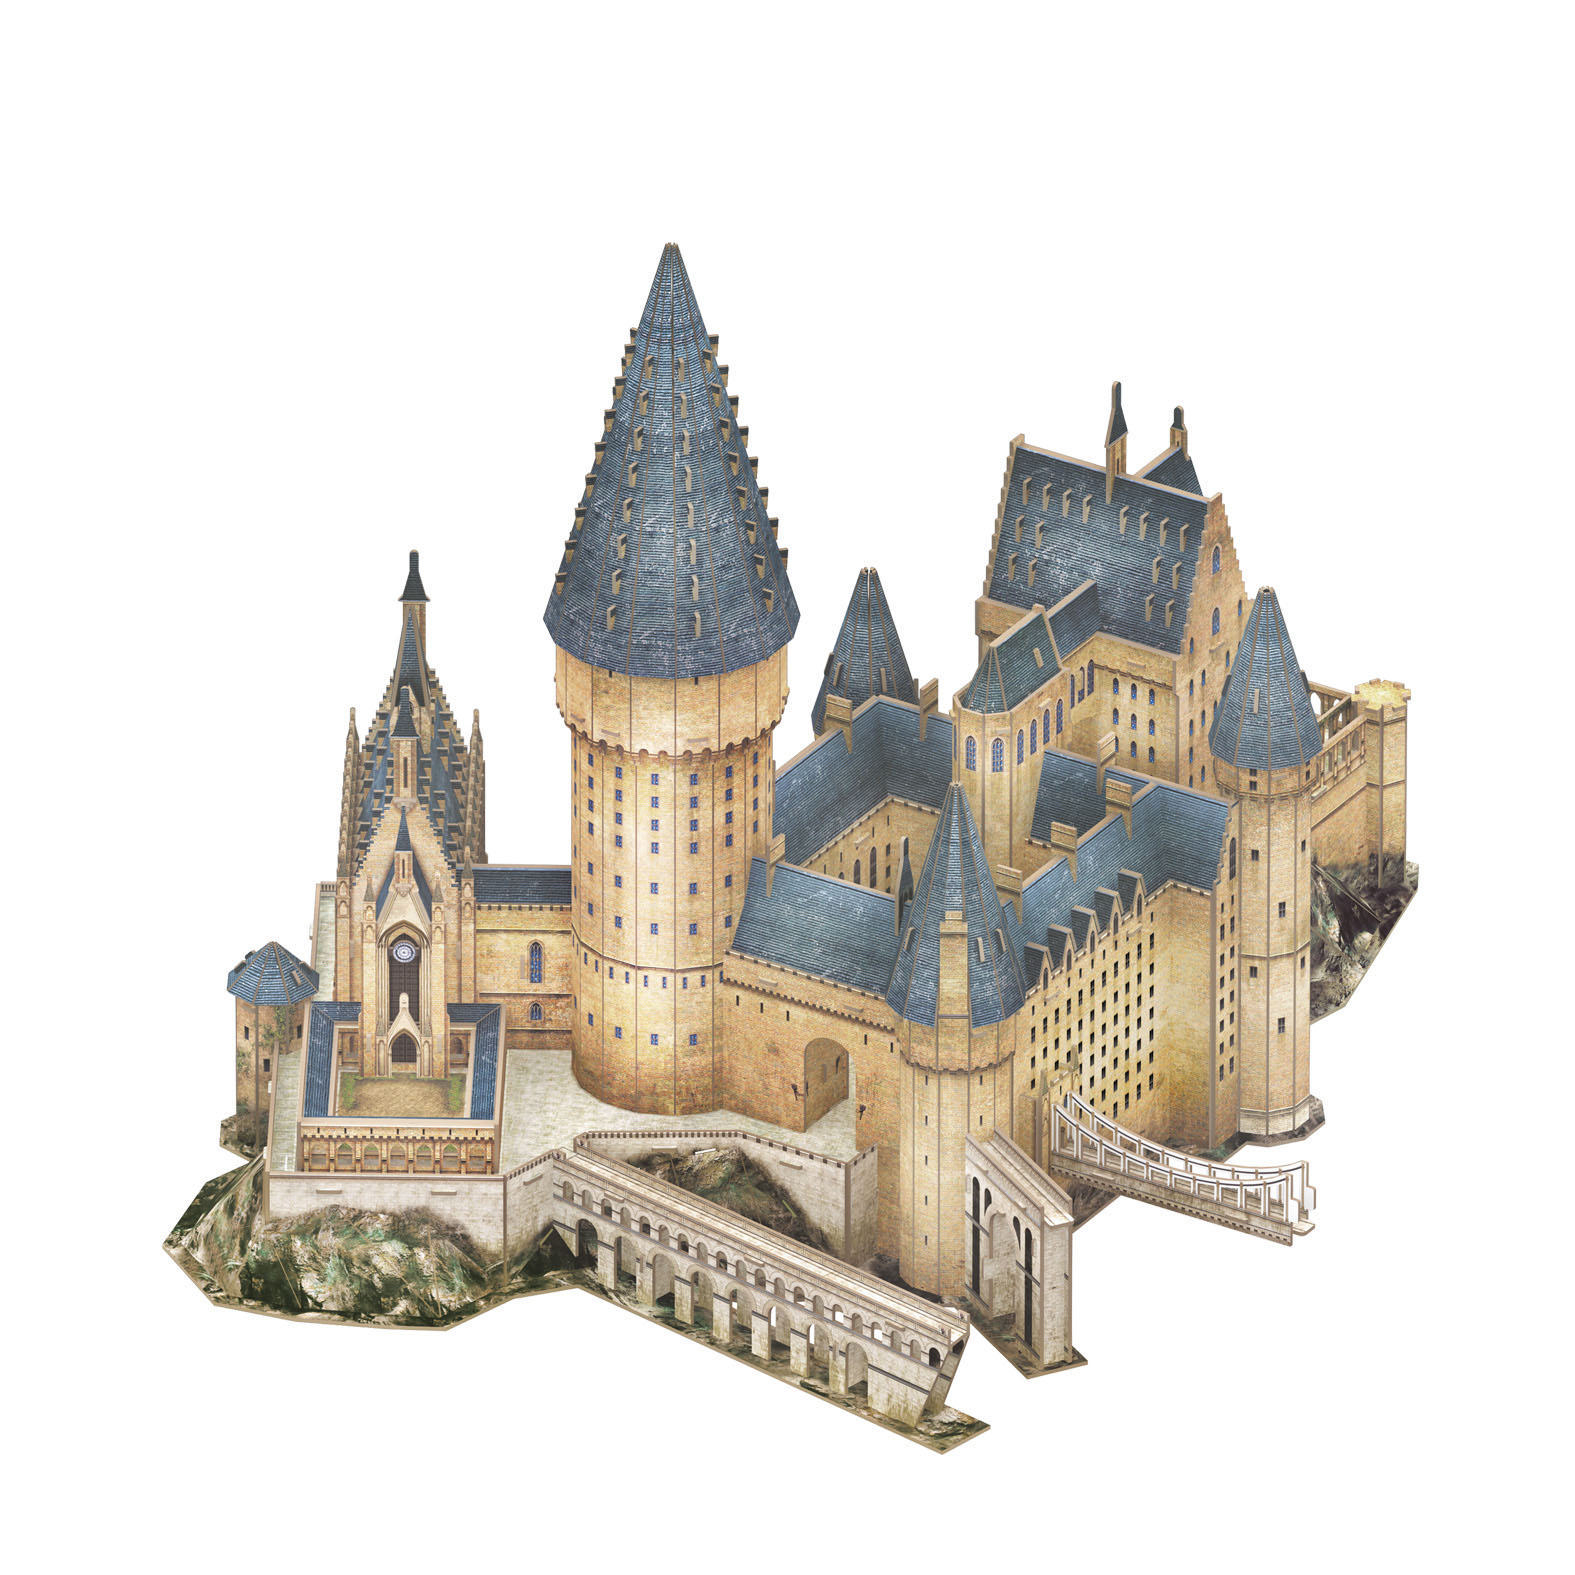 Hall Hogwarts™ Great Mehrfarbig 3D REVELL Potter Puzzle, Harry